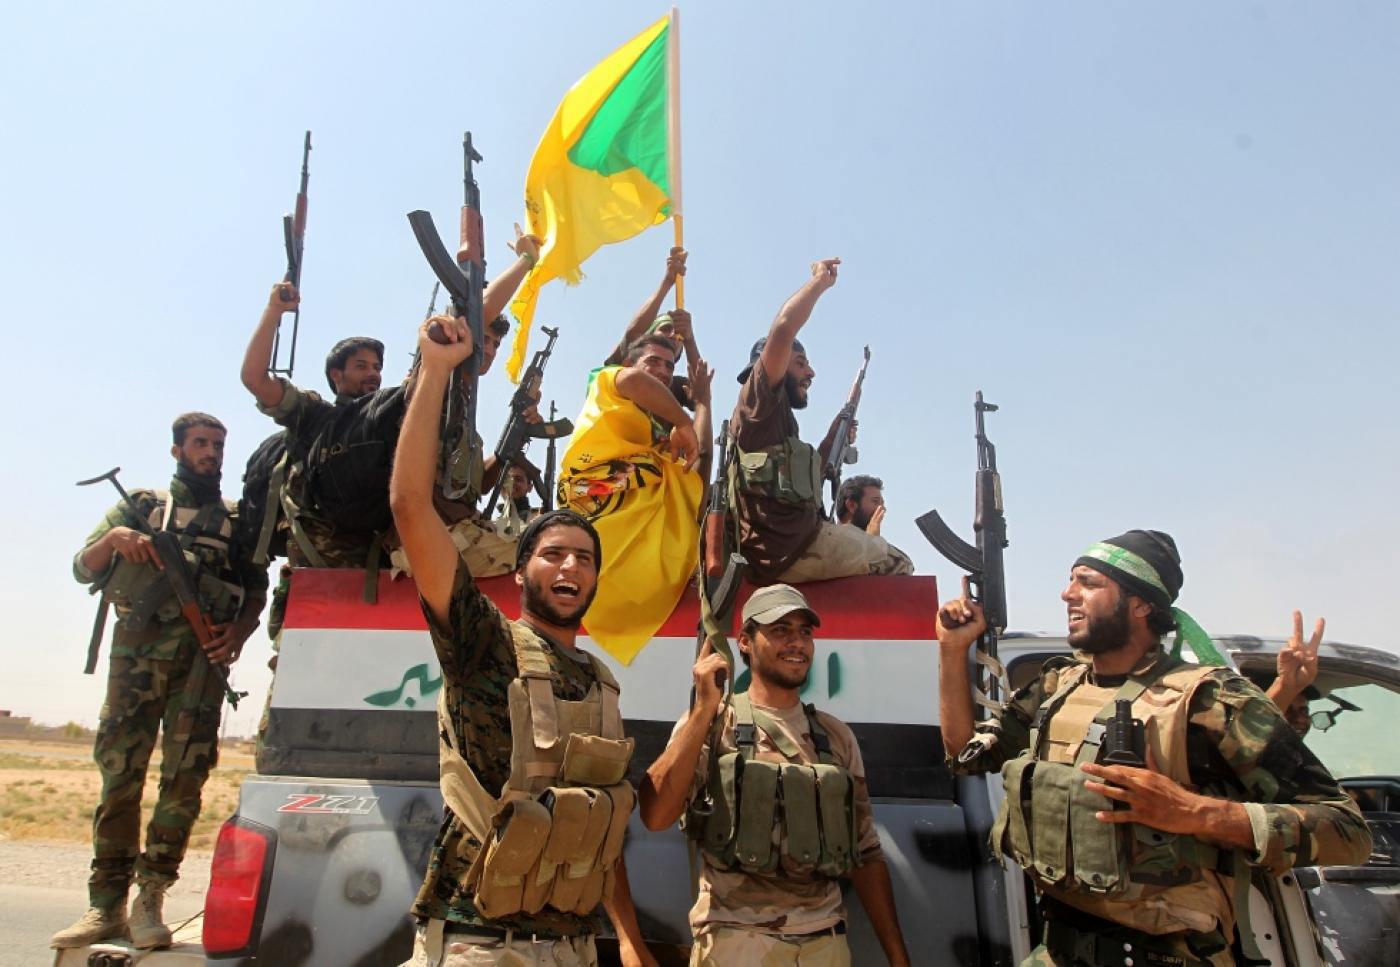 ifmat - A growing challenge for Iraq - Iran-aligned Shiite militias